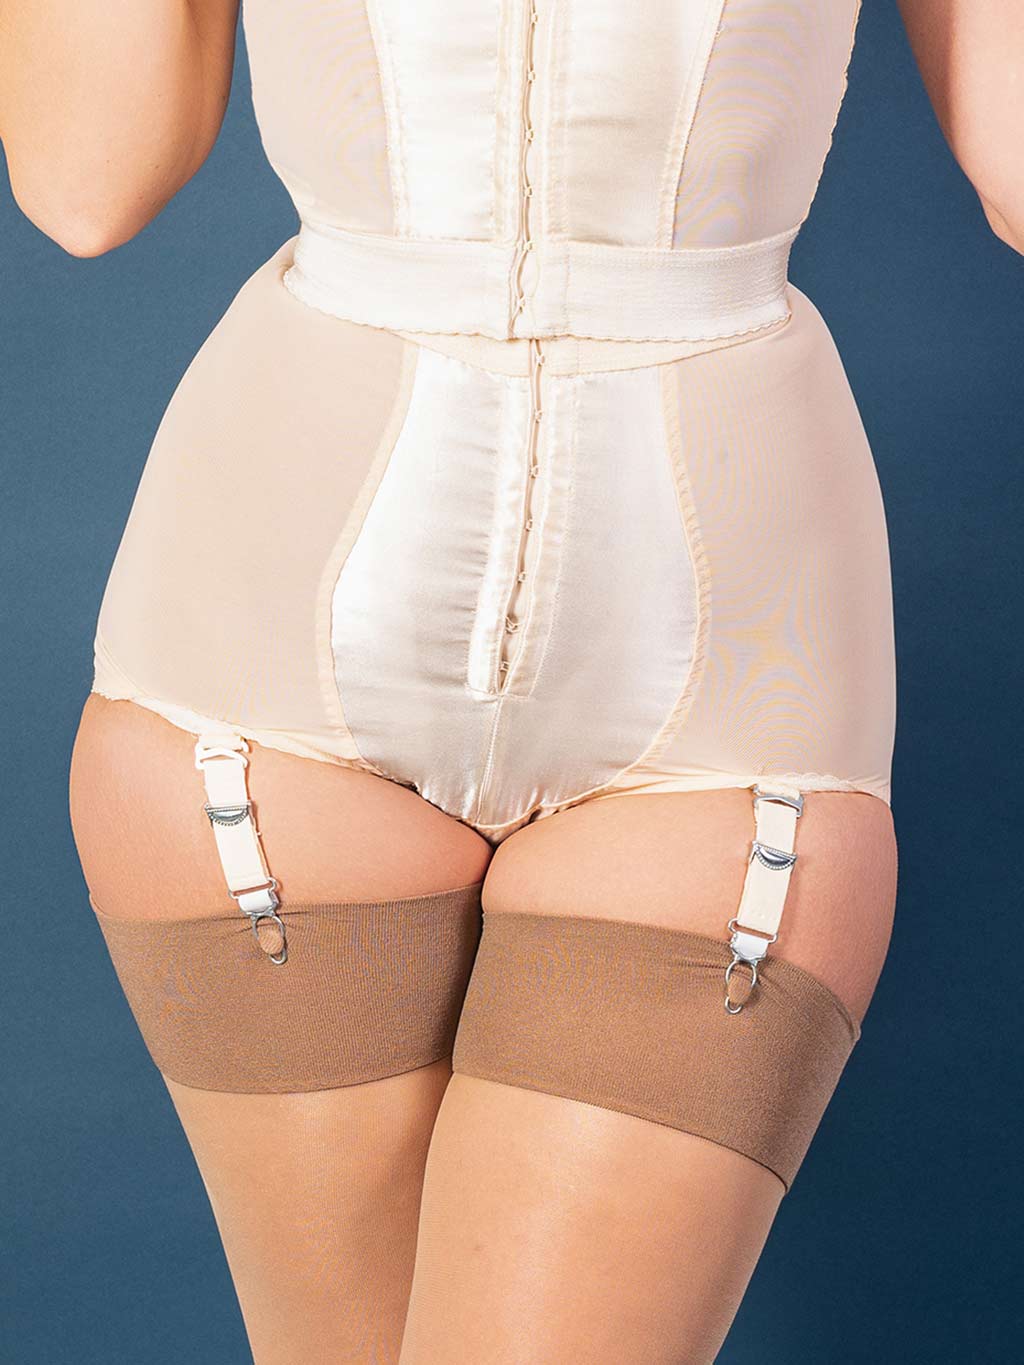 1950s inspired panty girdle.  Made from satin and strong powermesh with wide elastic to cinch your waist.  Detachable suspender/garter straps so can be worn with or without stockings.